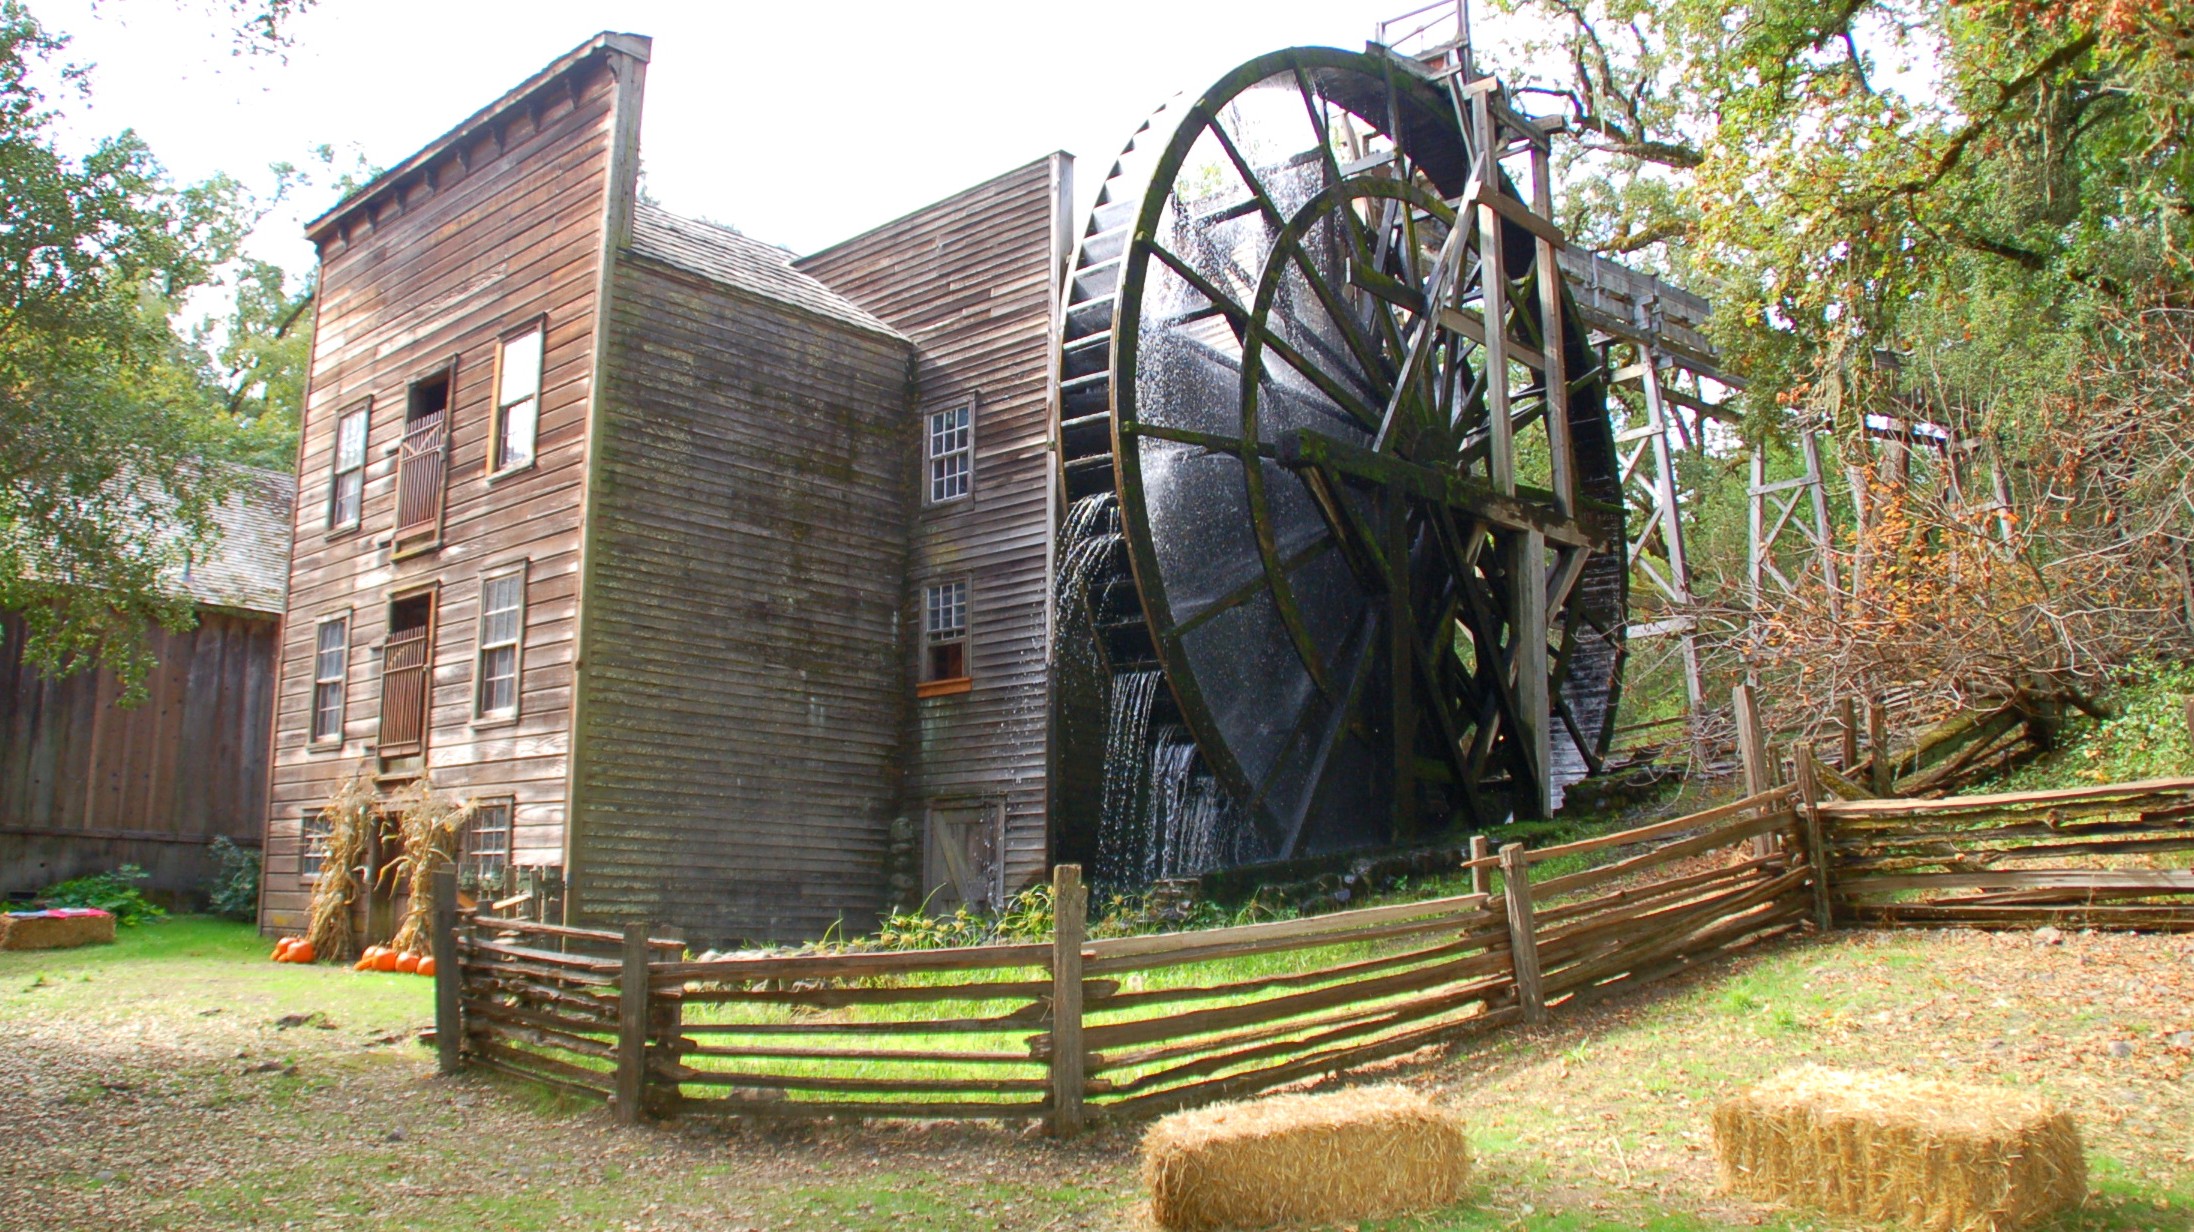 The wonderful Bale Grist Mill